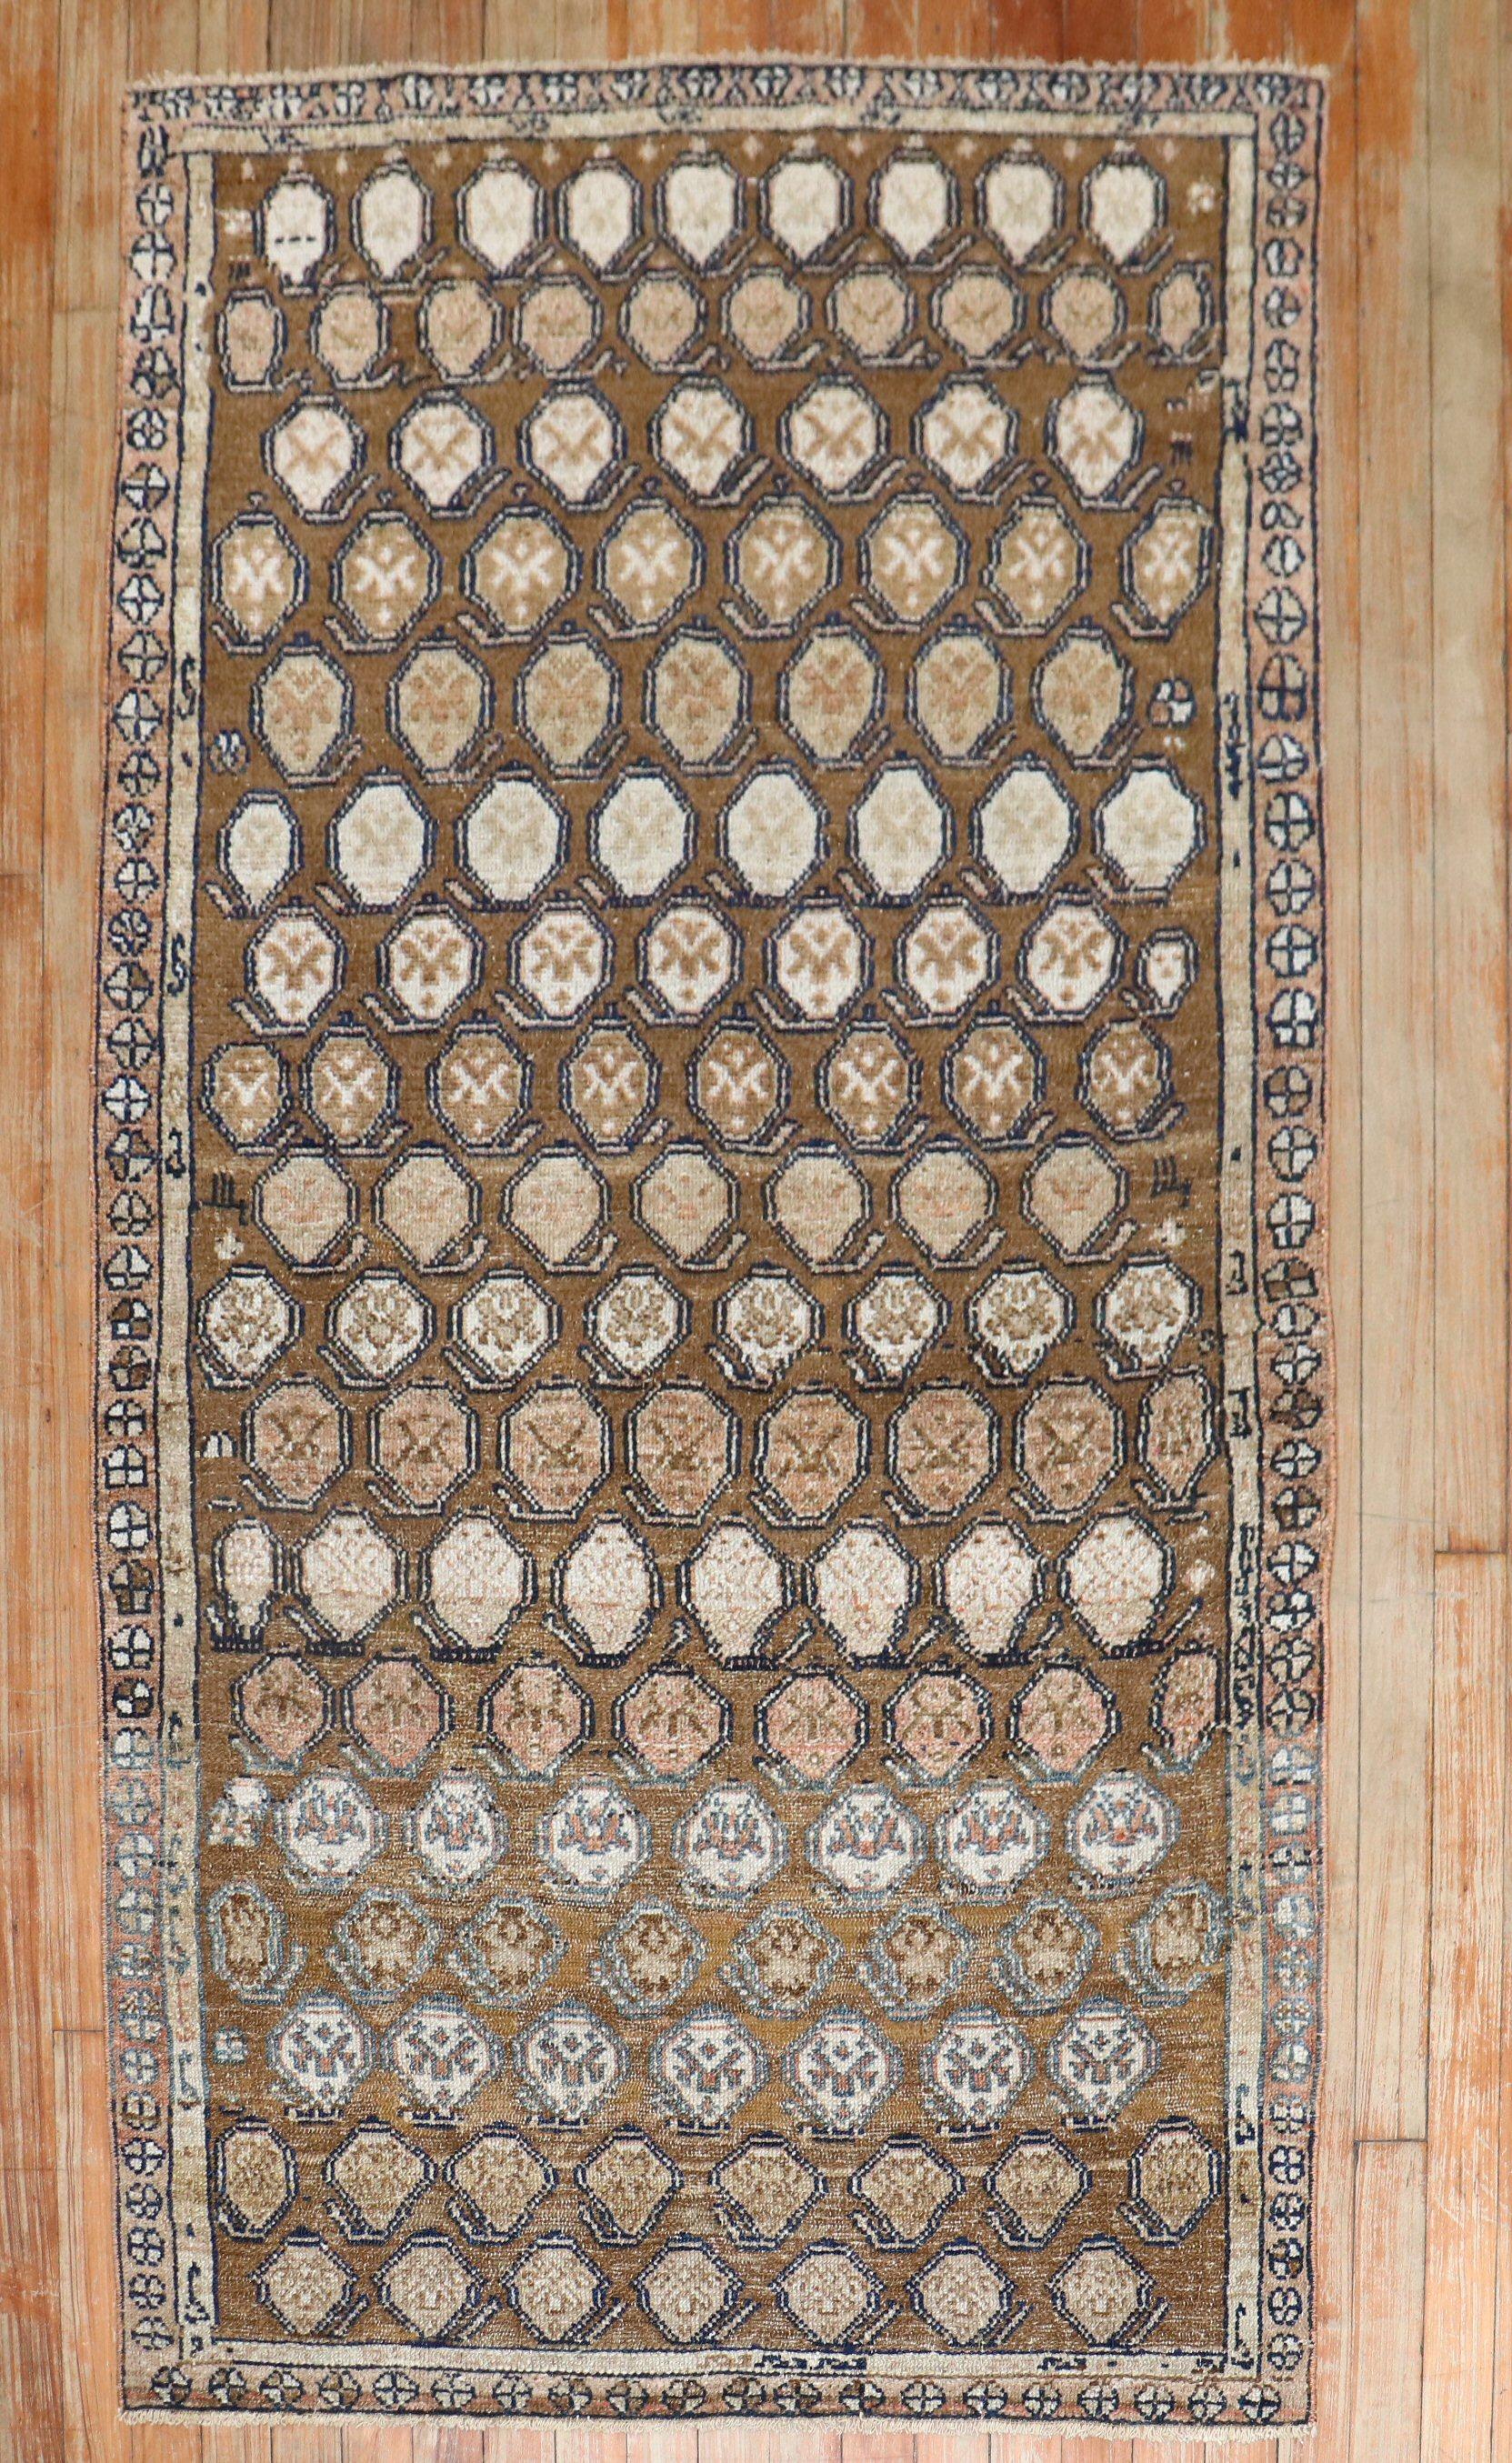 An early 20th century Persian Serab Decorative Scatter size rug

Measures: 3'3'' x 5'9''